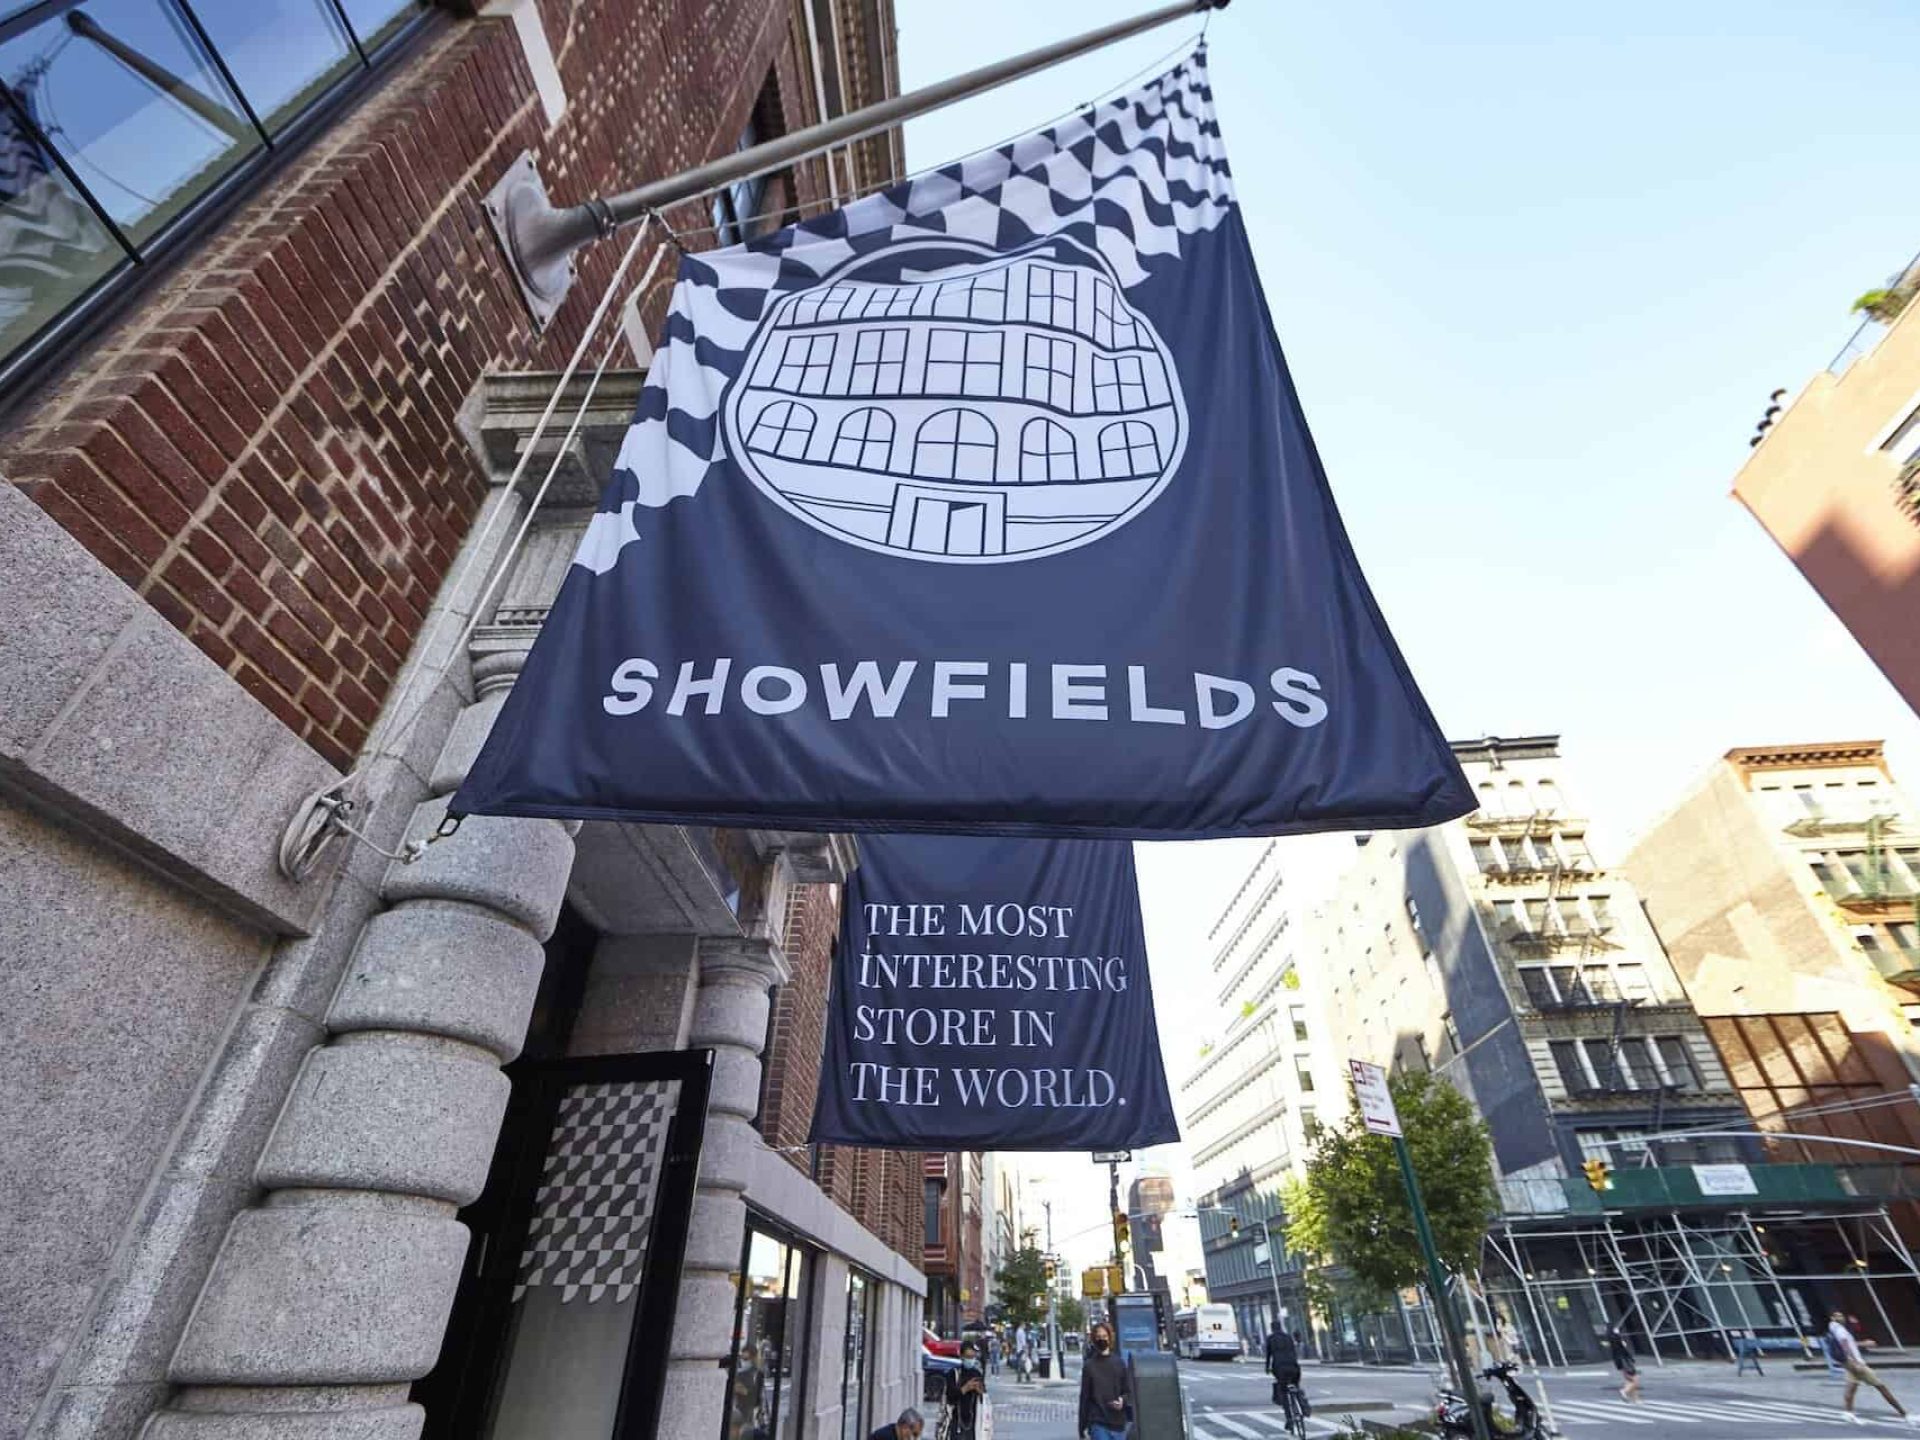 Close up of Showfields banner hanging off of the department store. Large blue banner with white text and designs.